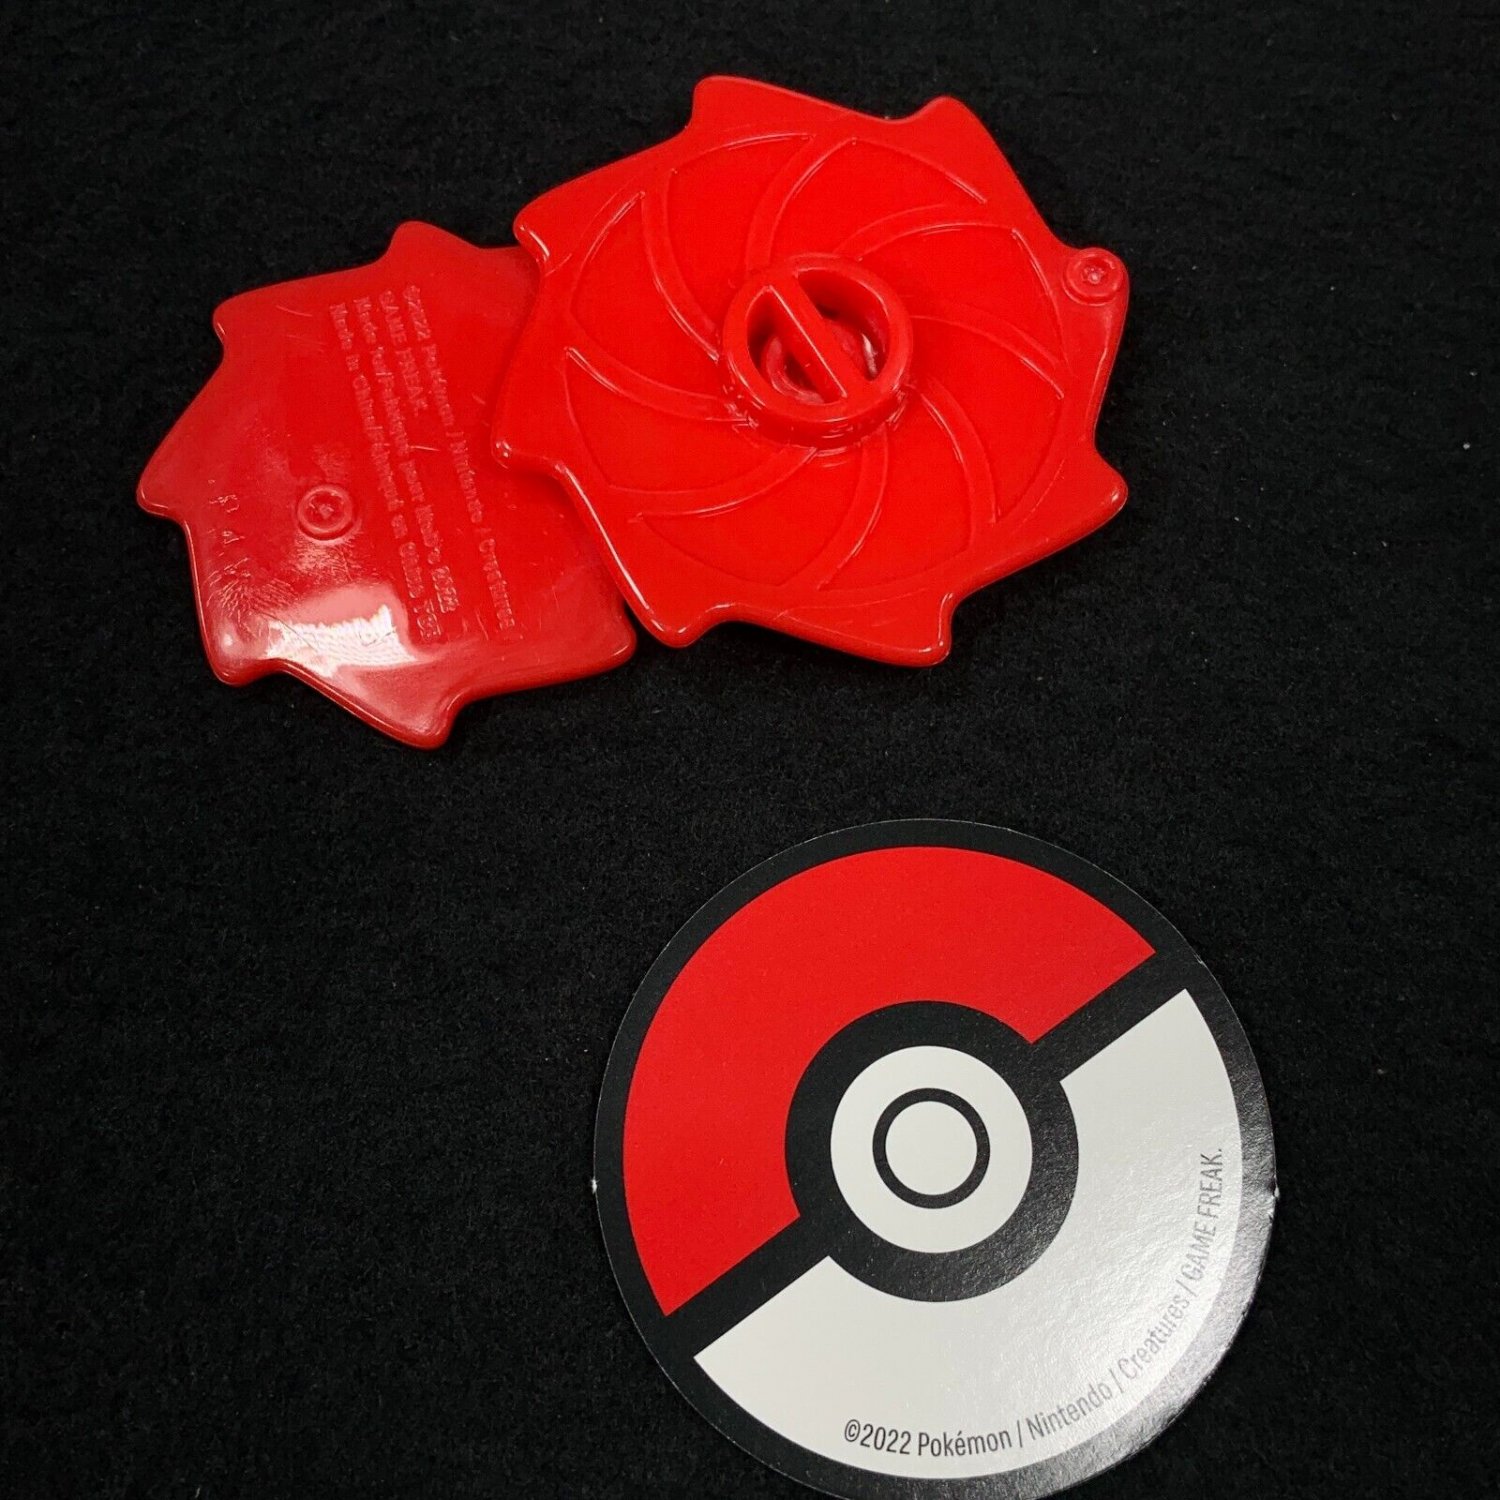 Pokemon Pikachu 1 Match Battle Spinner Toy Game Flip Coin and Instructions